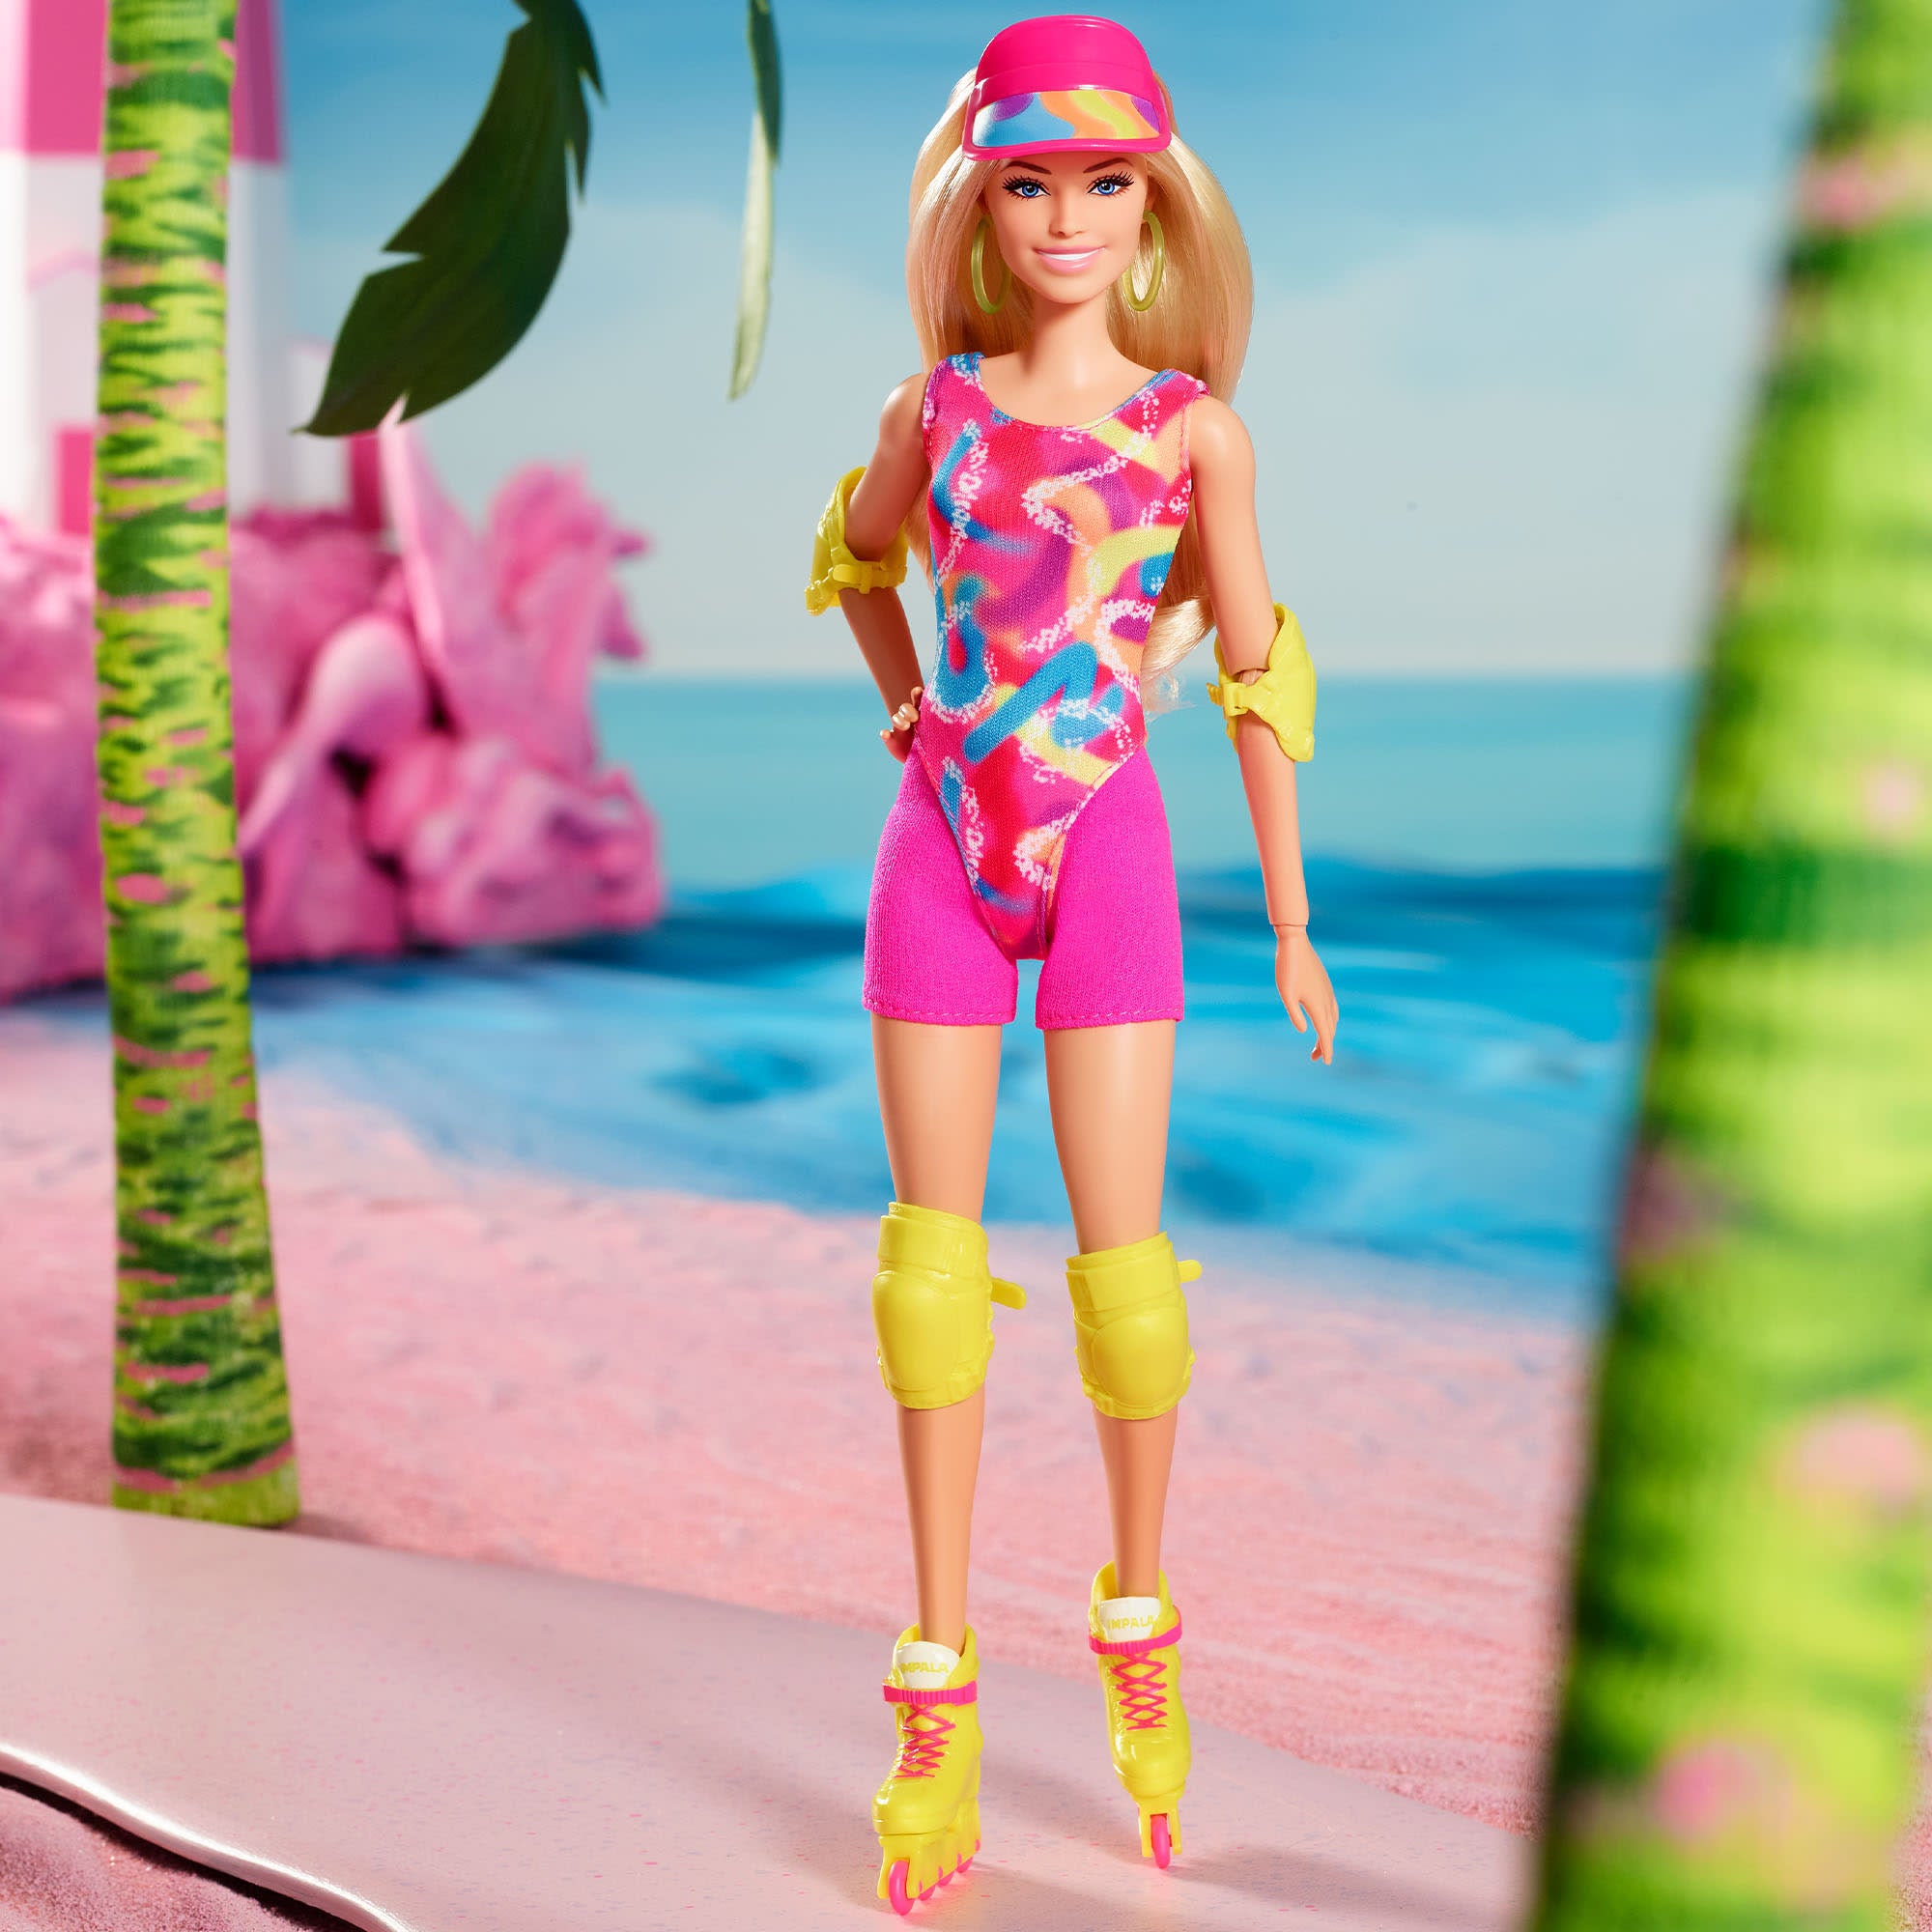 Ken Doll in Inline Skating Outfit – Barbie The Movie – Mattel Creations